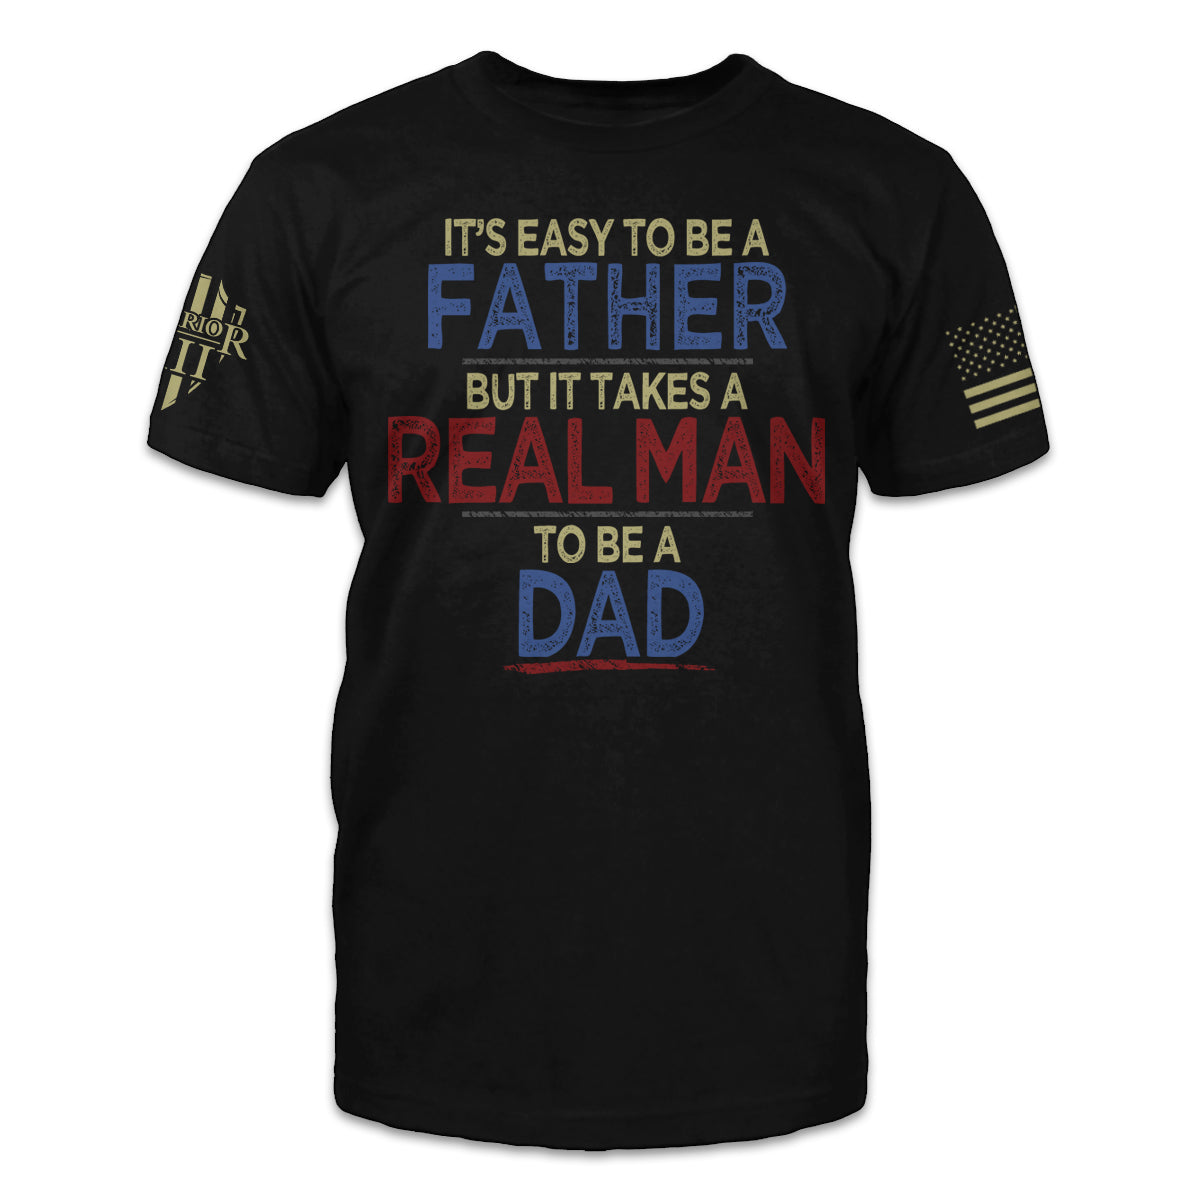 A black t-shirt with the words 'It's easy to be a father, but it takes a real man to be a dad" printed on the front.